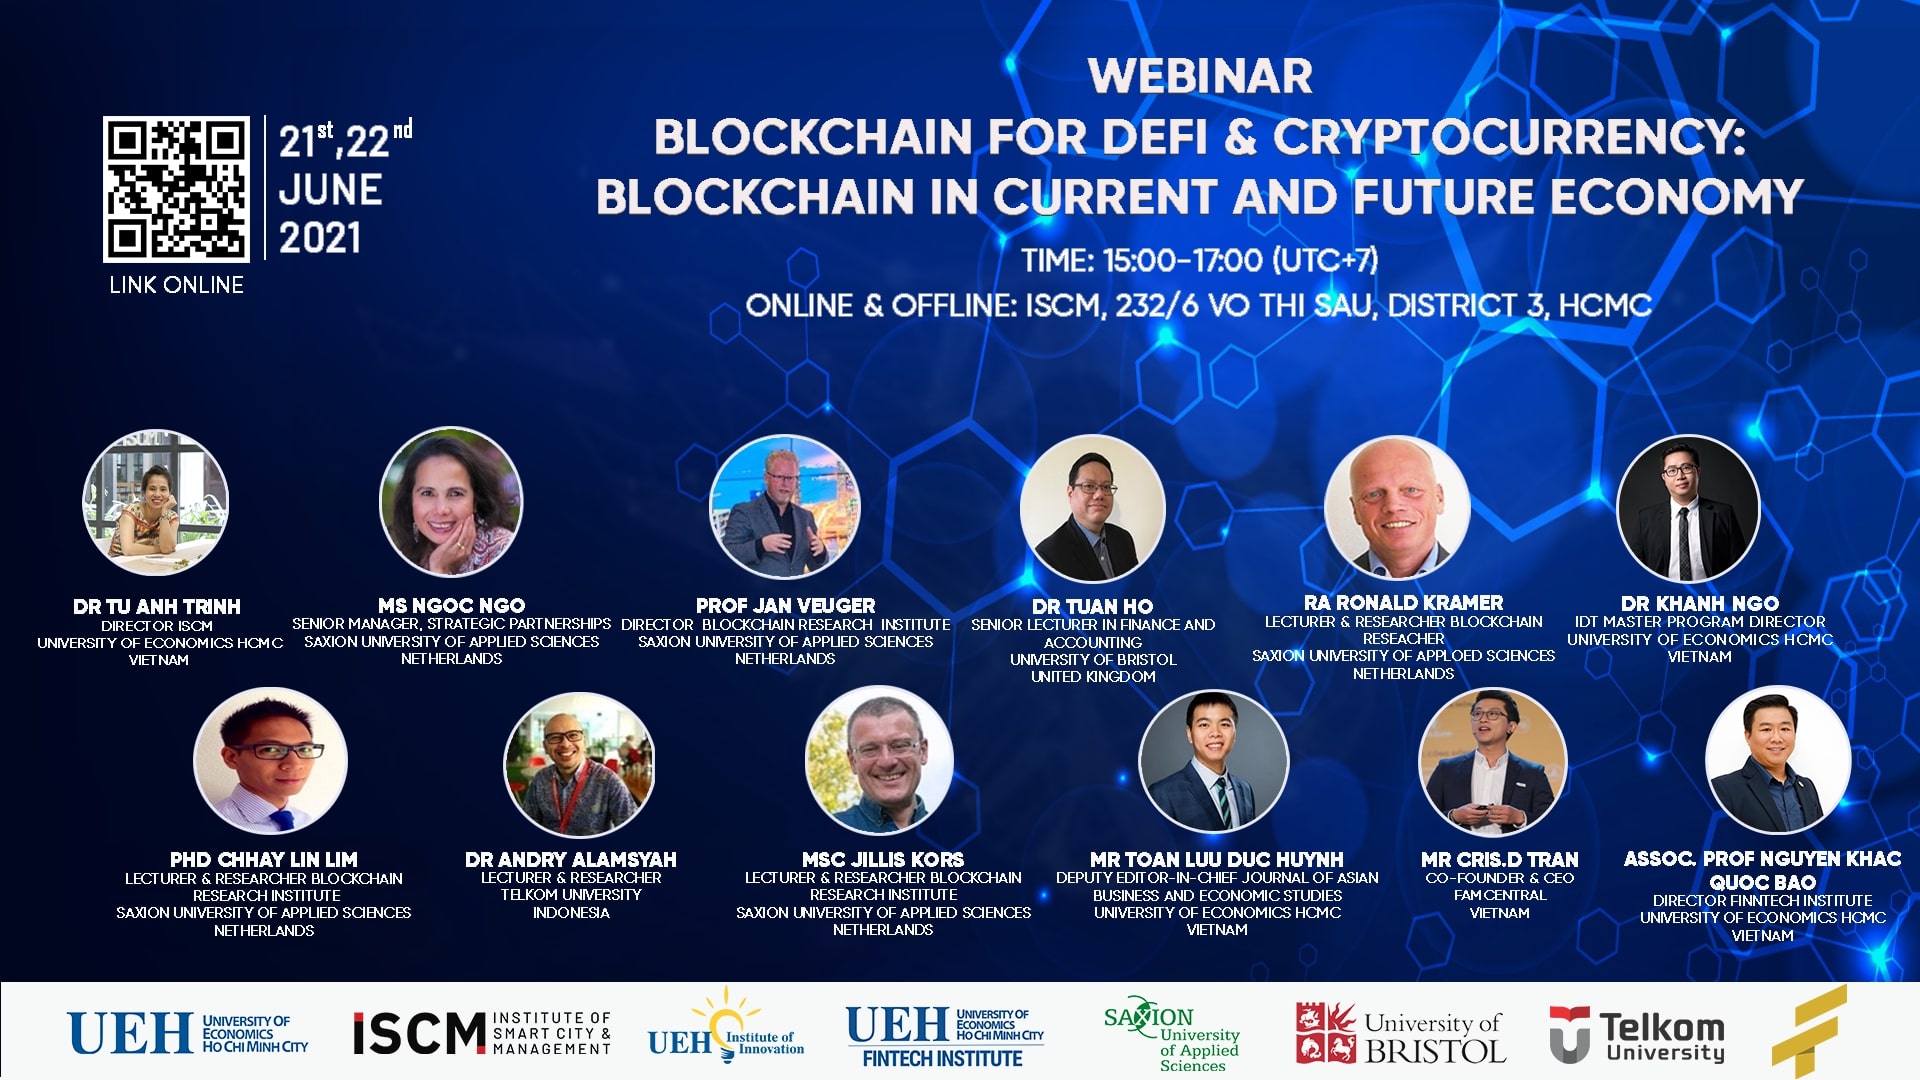 Webinar "Blockchain for DeFi & Cryptocurrency - Blockchain in Current and Future Economy"